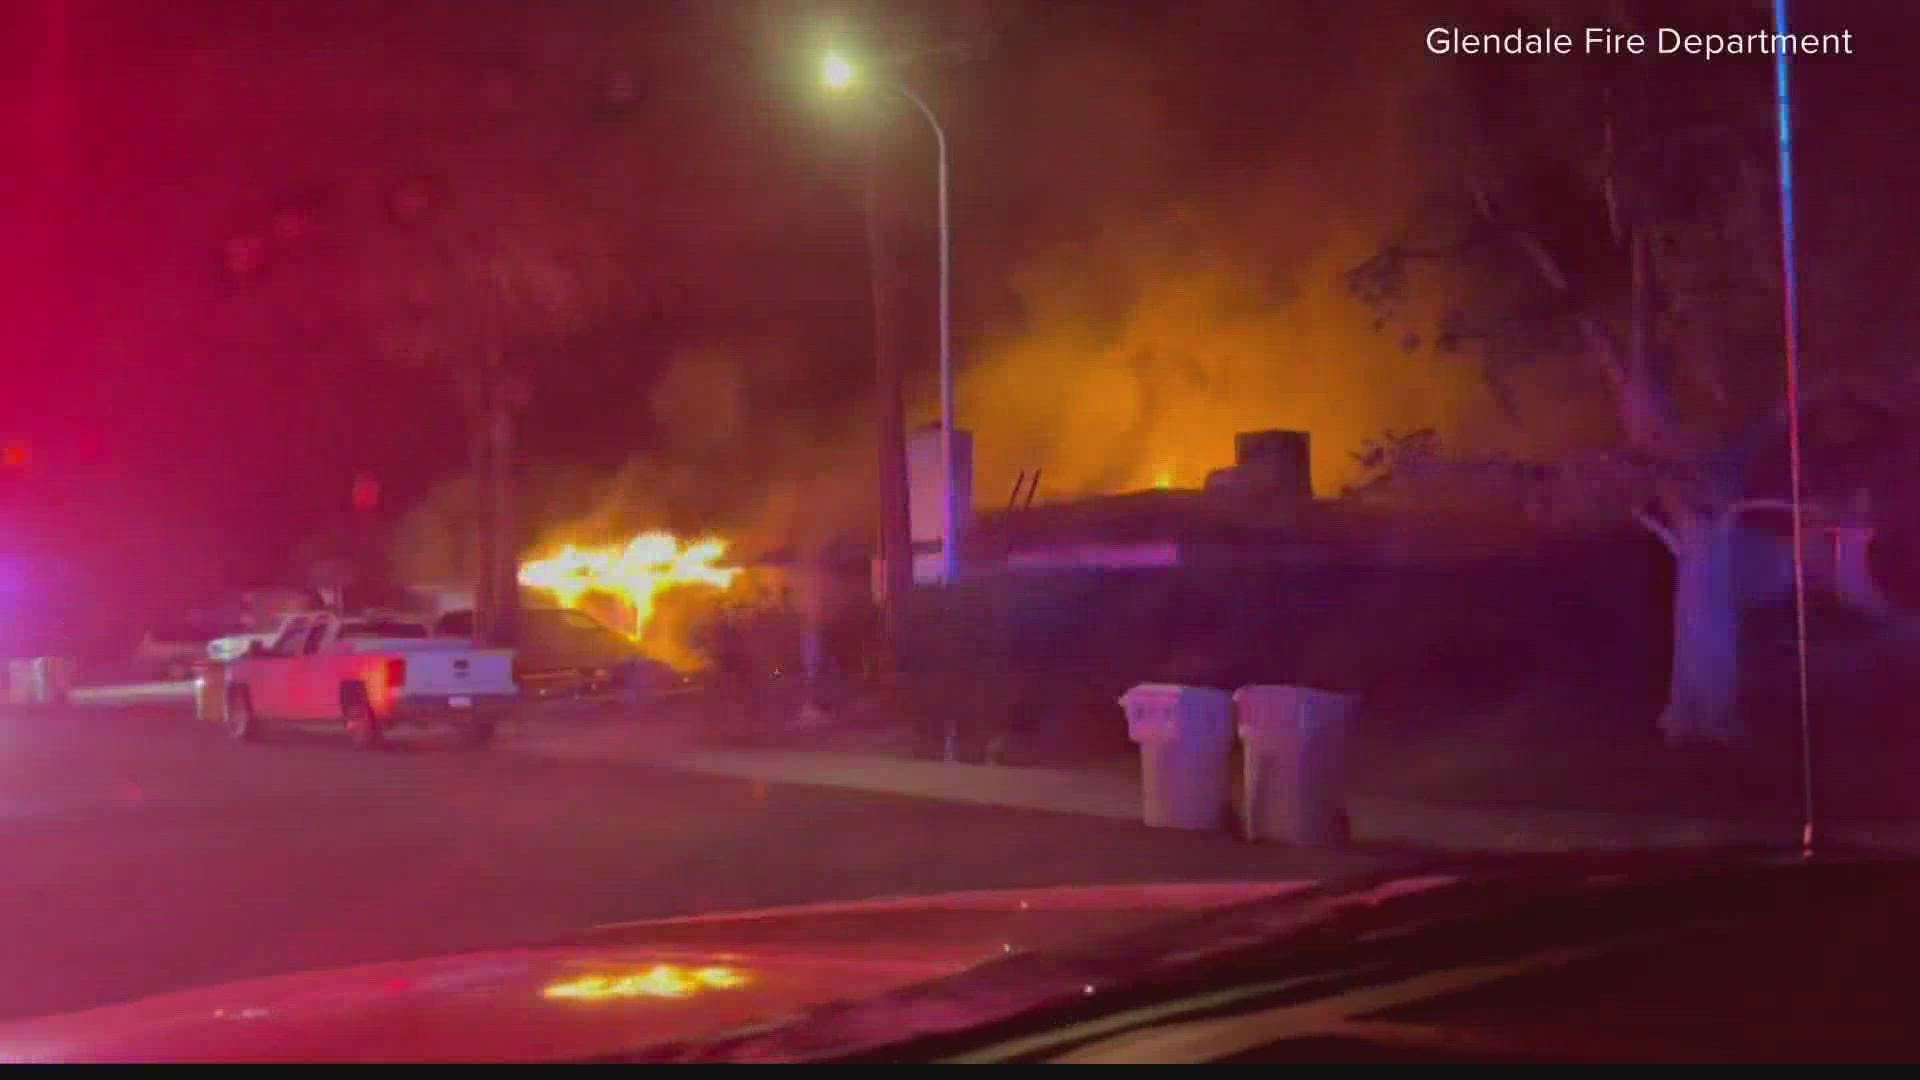 Three homes were damaged this weekend after a series of firework-related fires in Glendale. Firefighters are reminding people how to use fireworks properly.